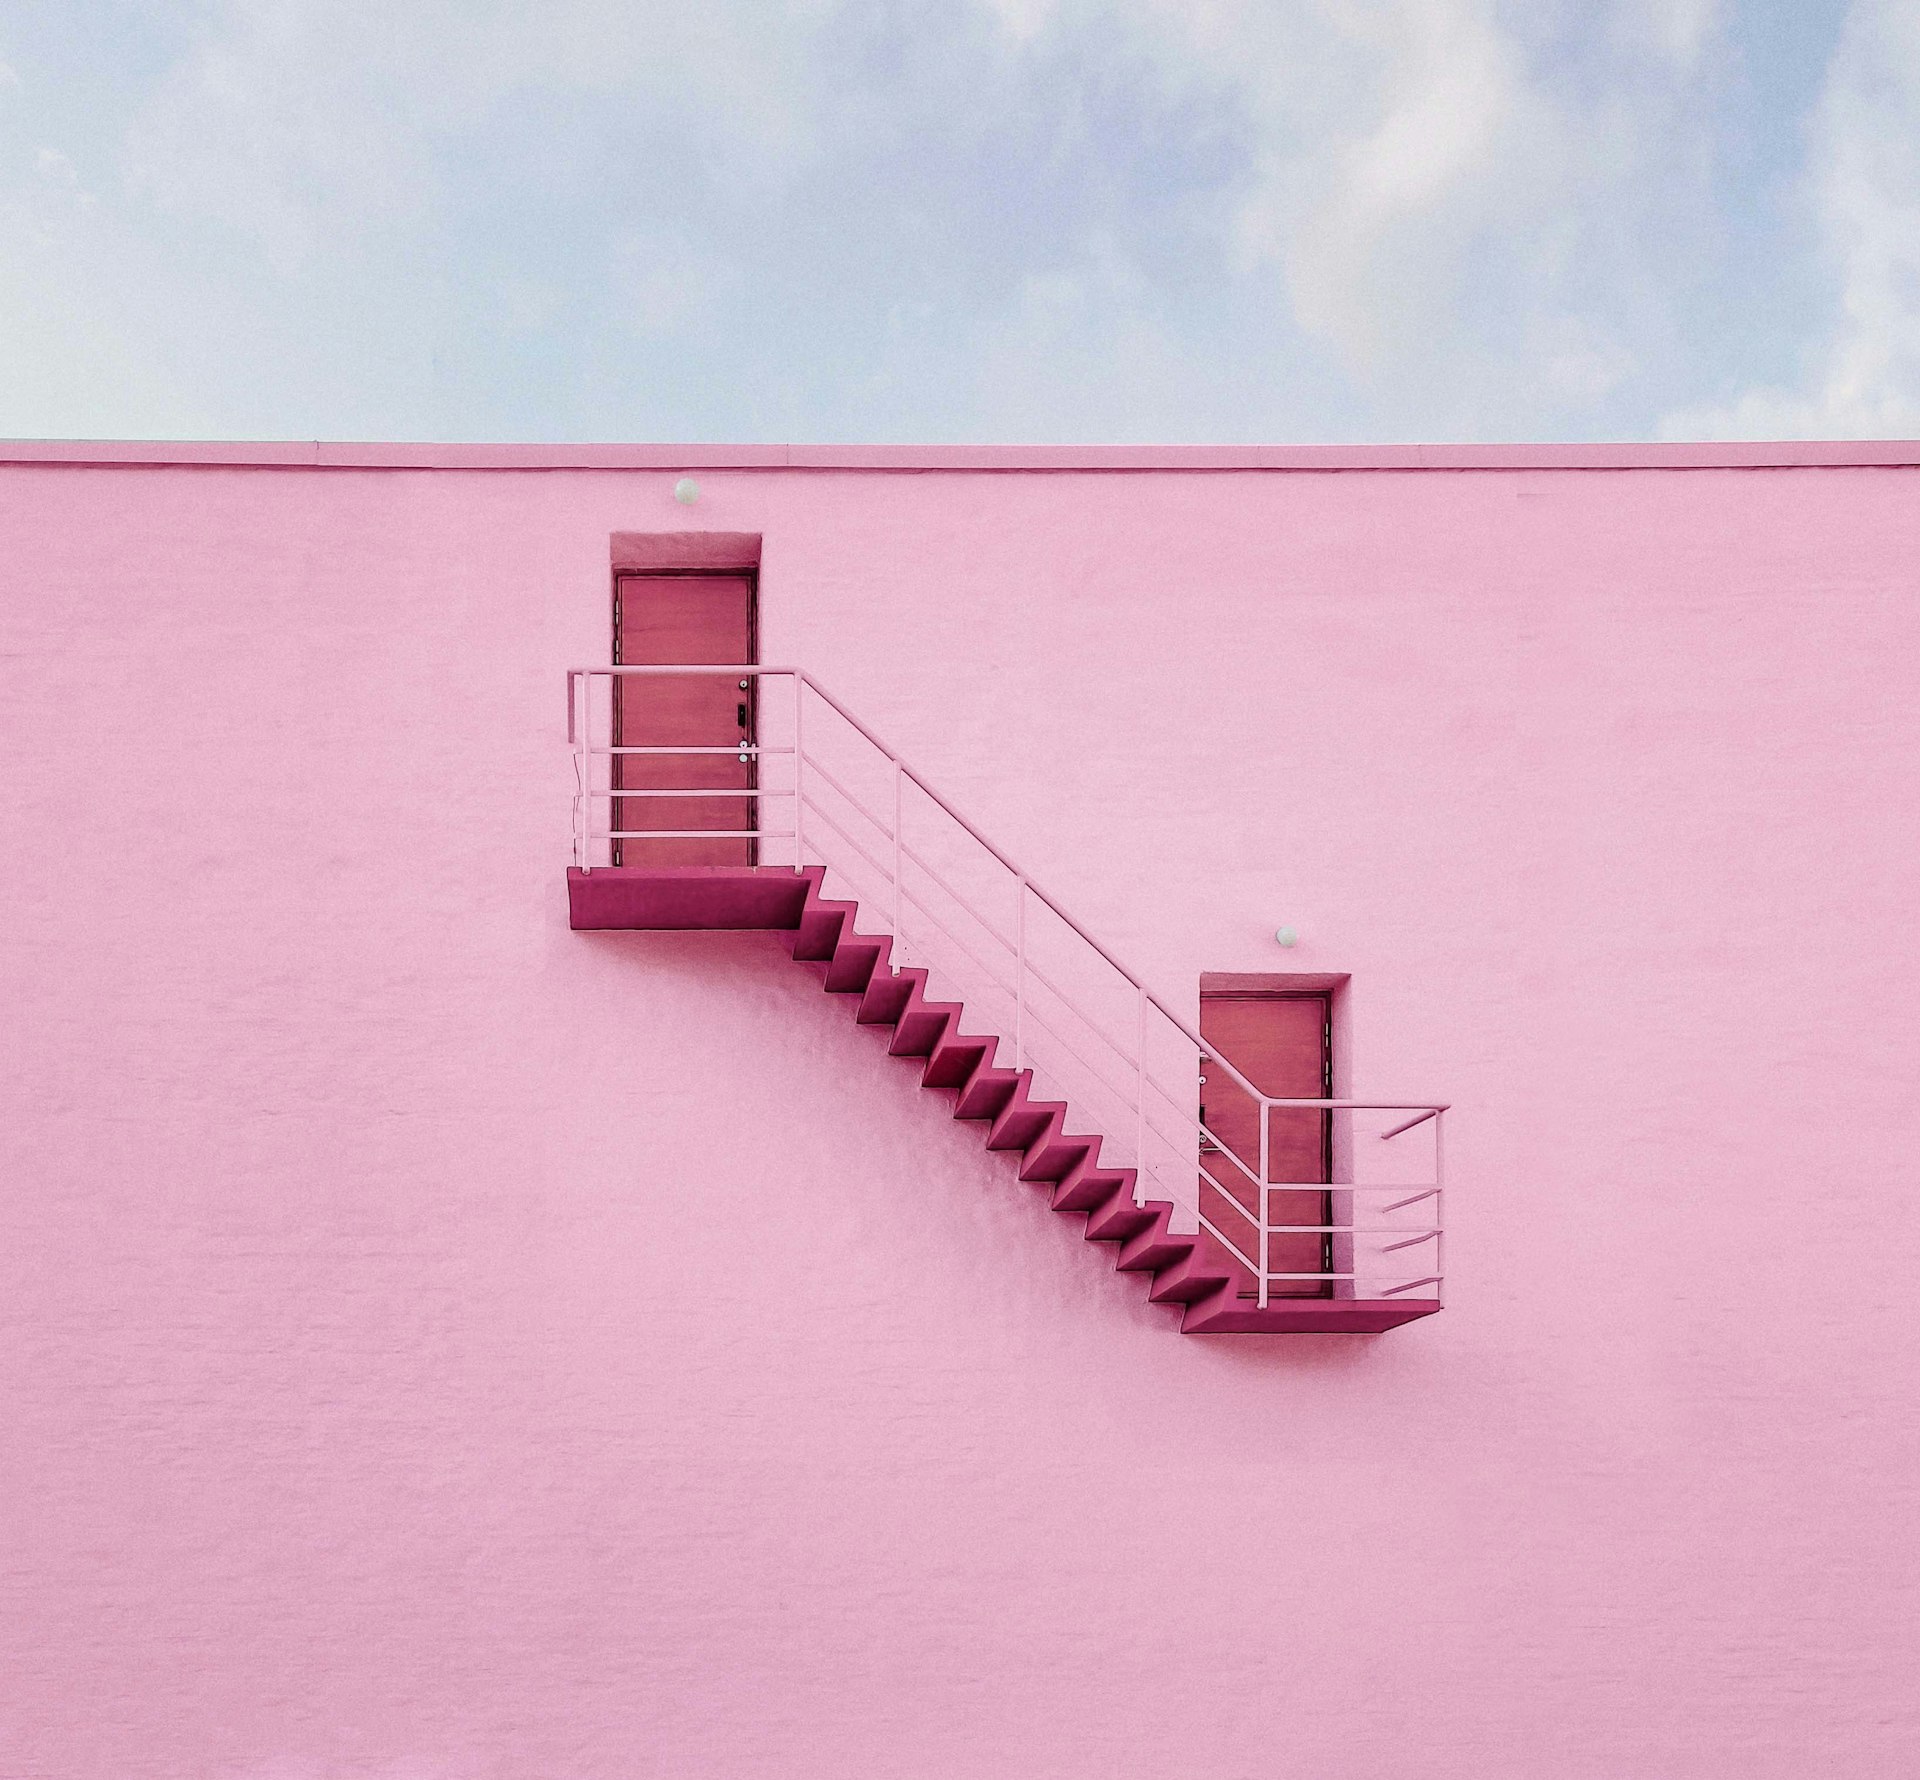 A stairwell leads between two doors on a pink wall.